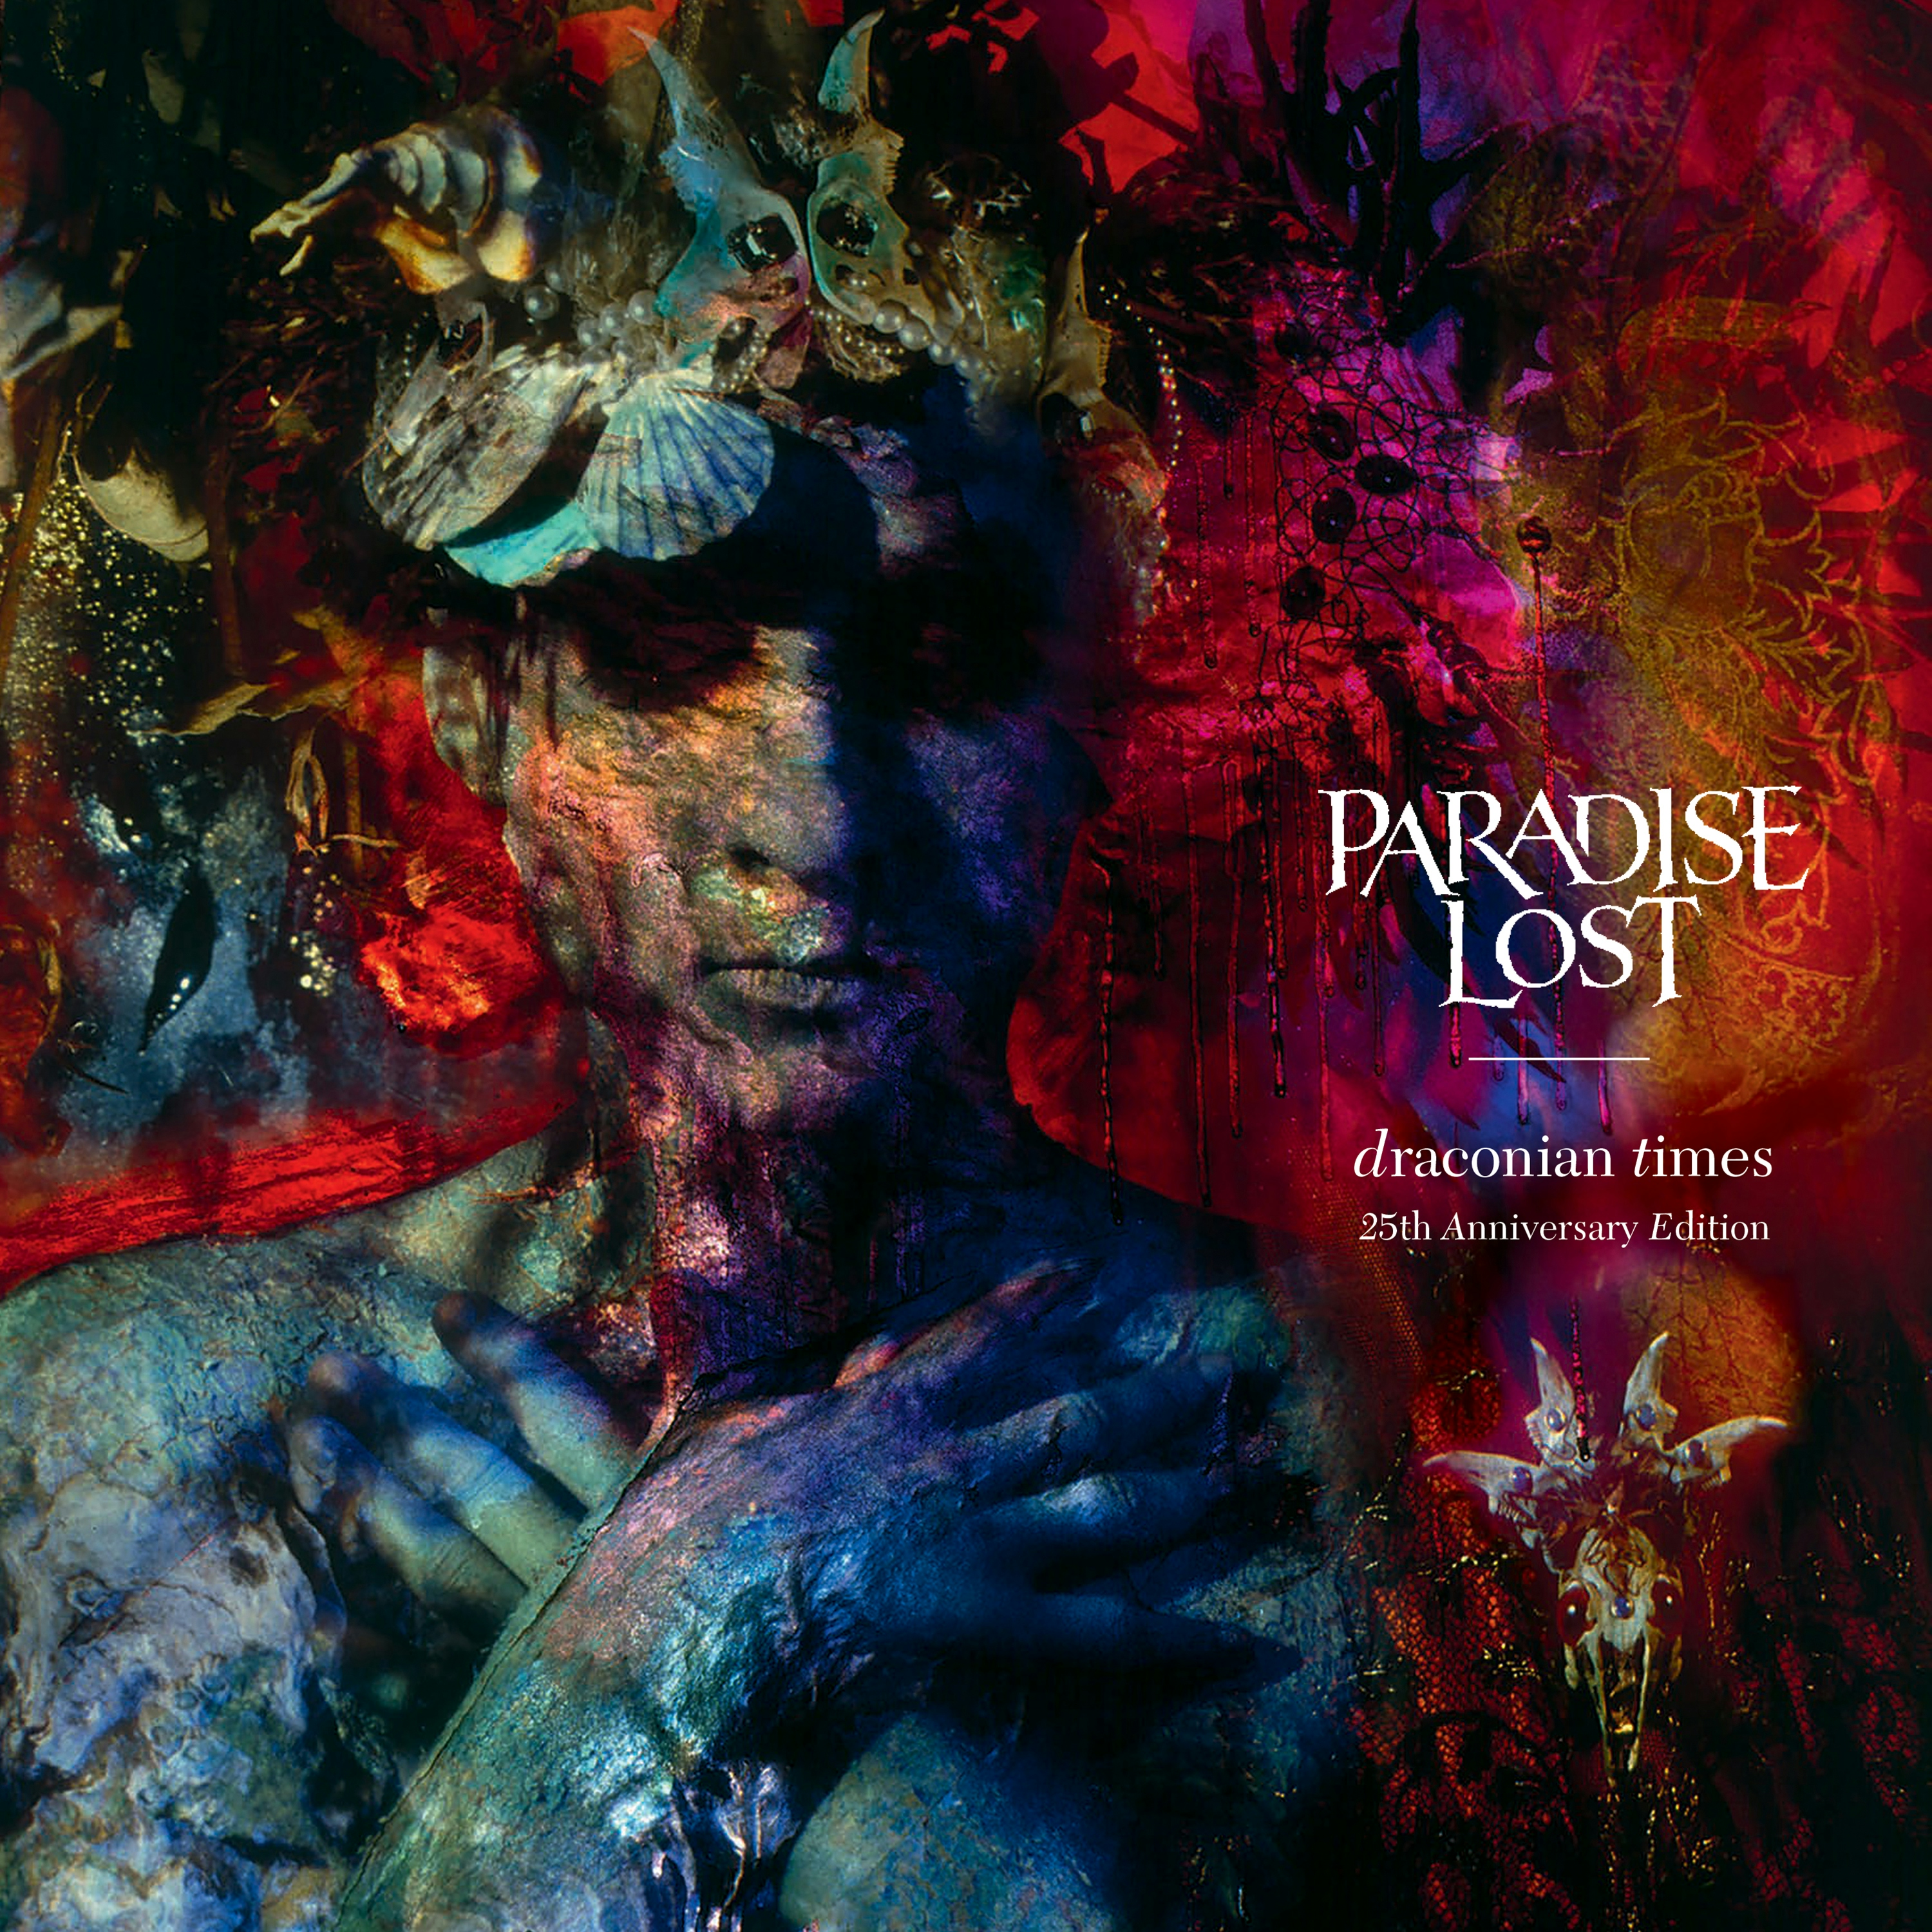 Album artwork for Album artwork for Draconian Times - 25th Anniversary Edition by Paradise Lost by Draconian Times - 25th Anniversary Edition - Paradise Lost